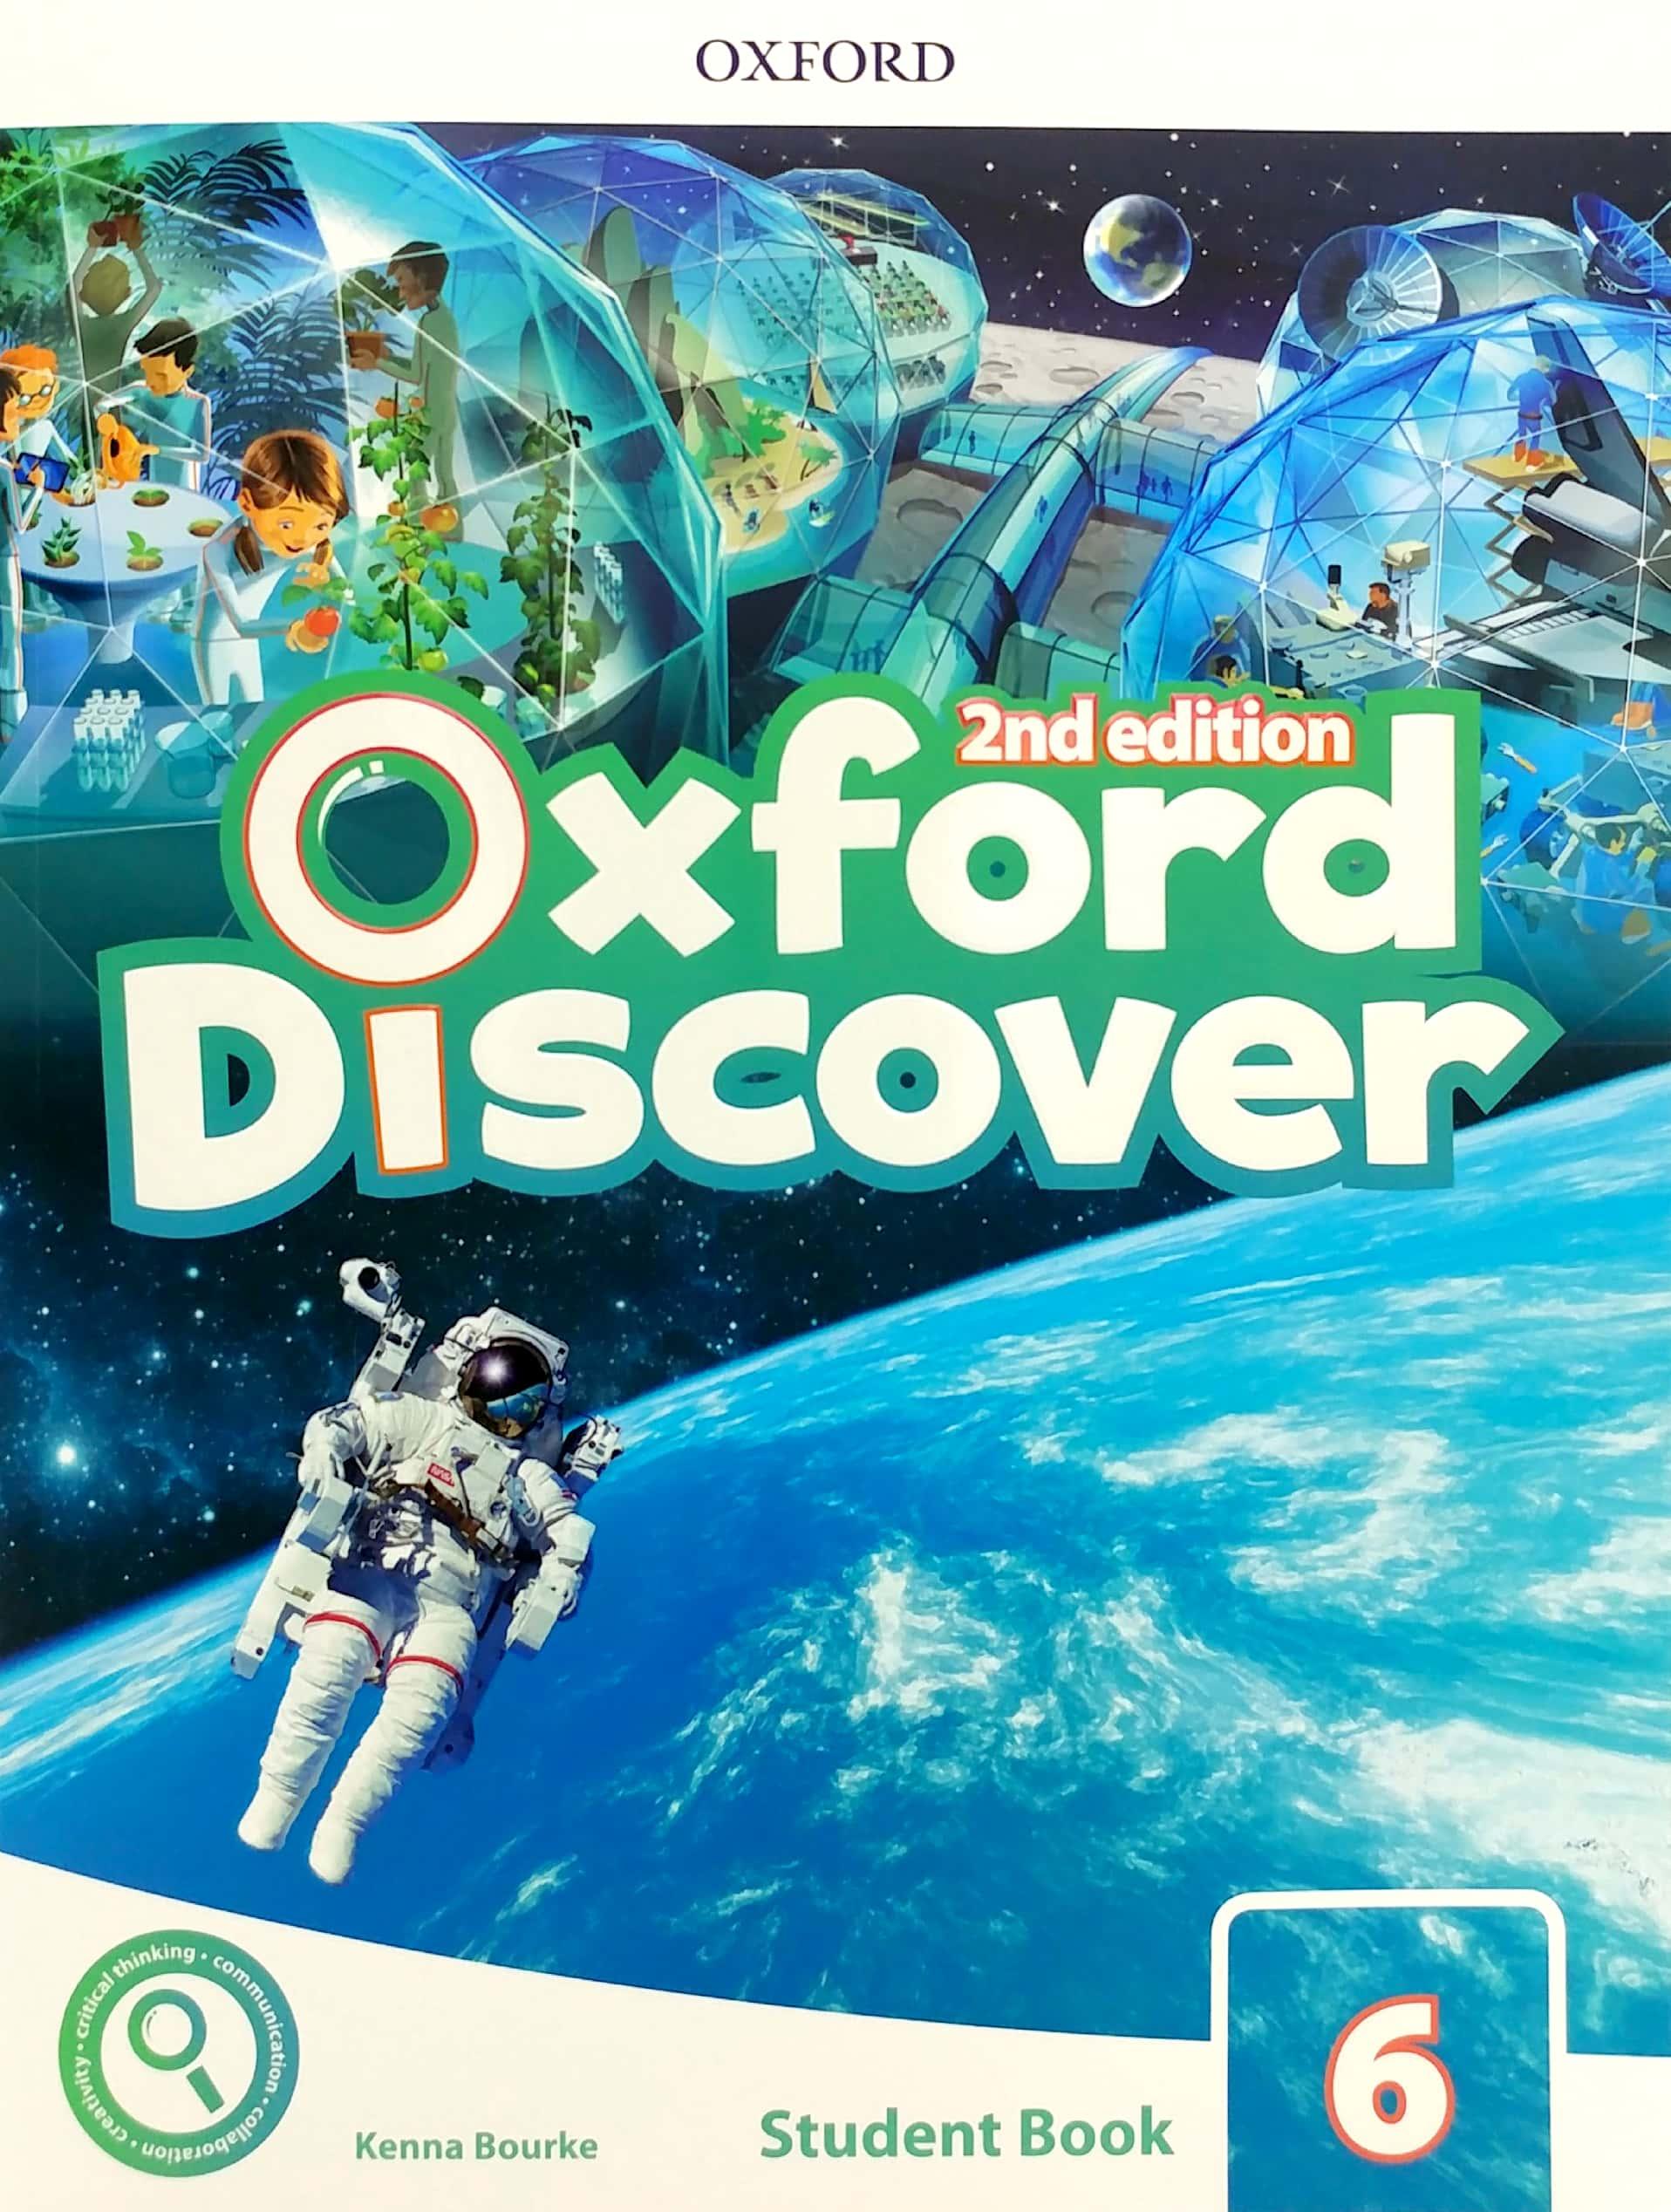 Oxford Discover: Level 6: Student Book Pack, 2nd Edition